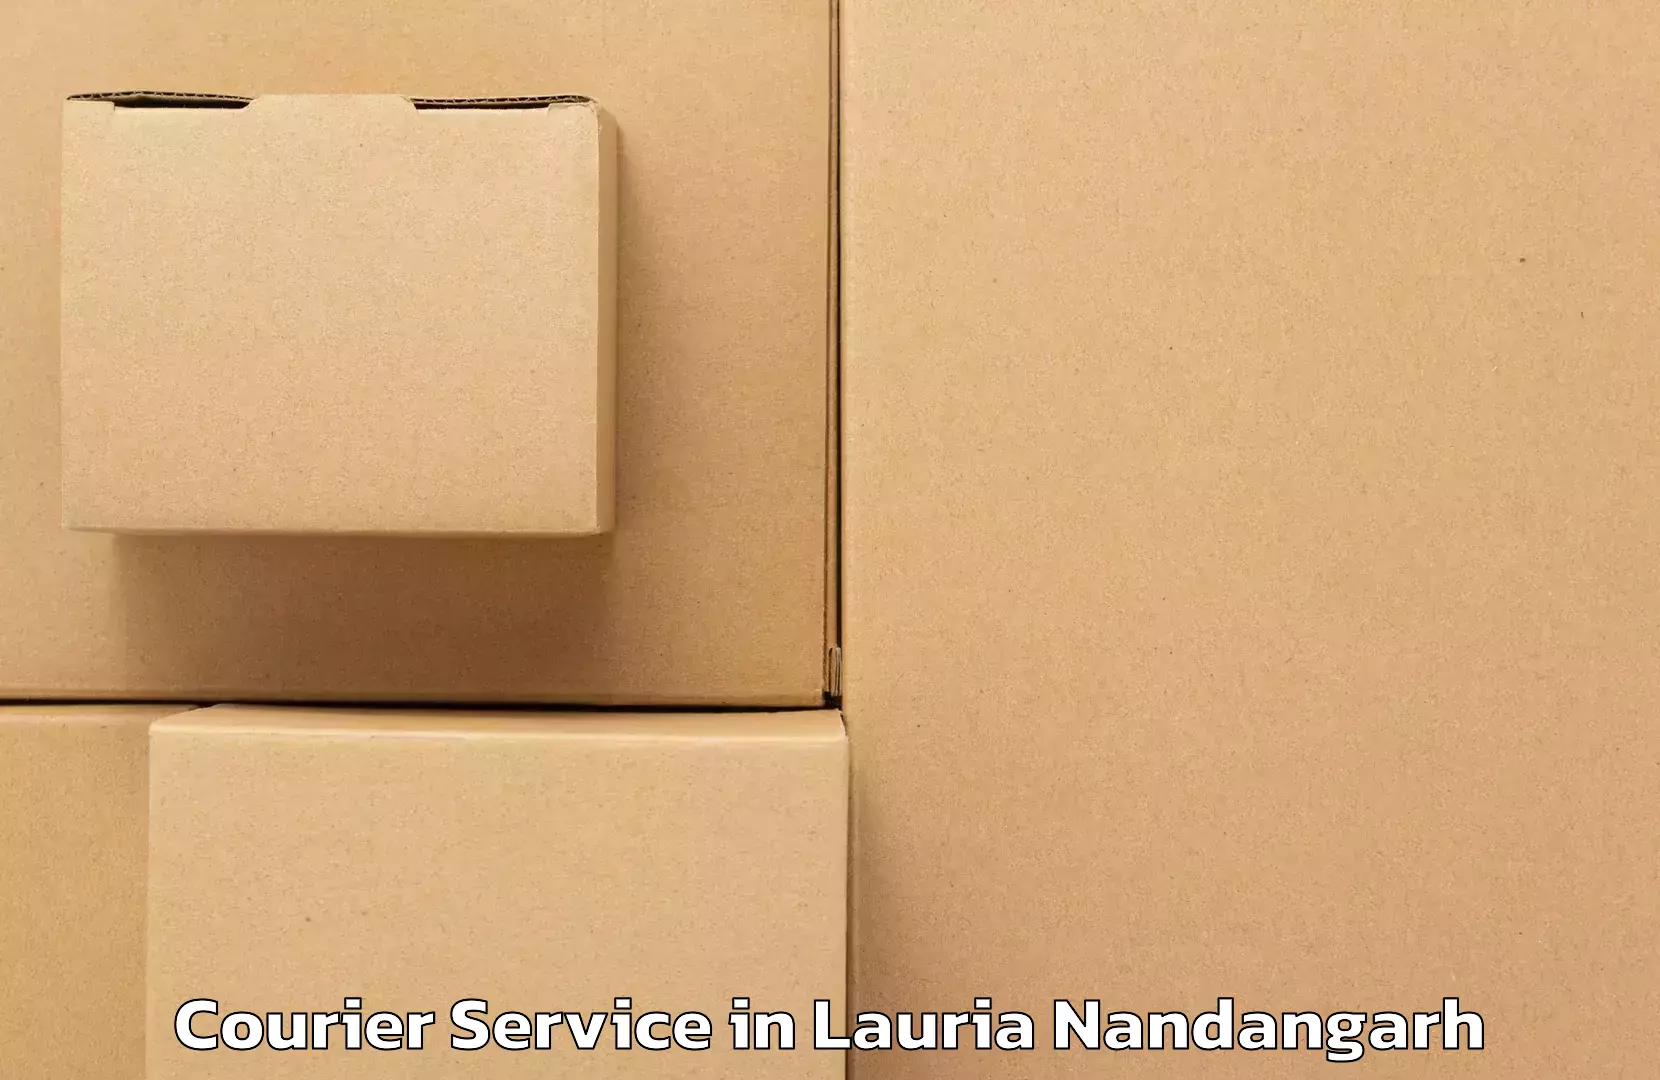 Fast shipping solutions in Lauria Nandangarh